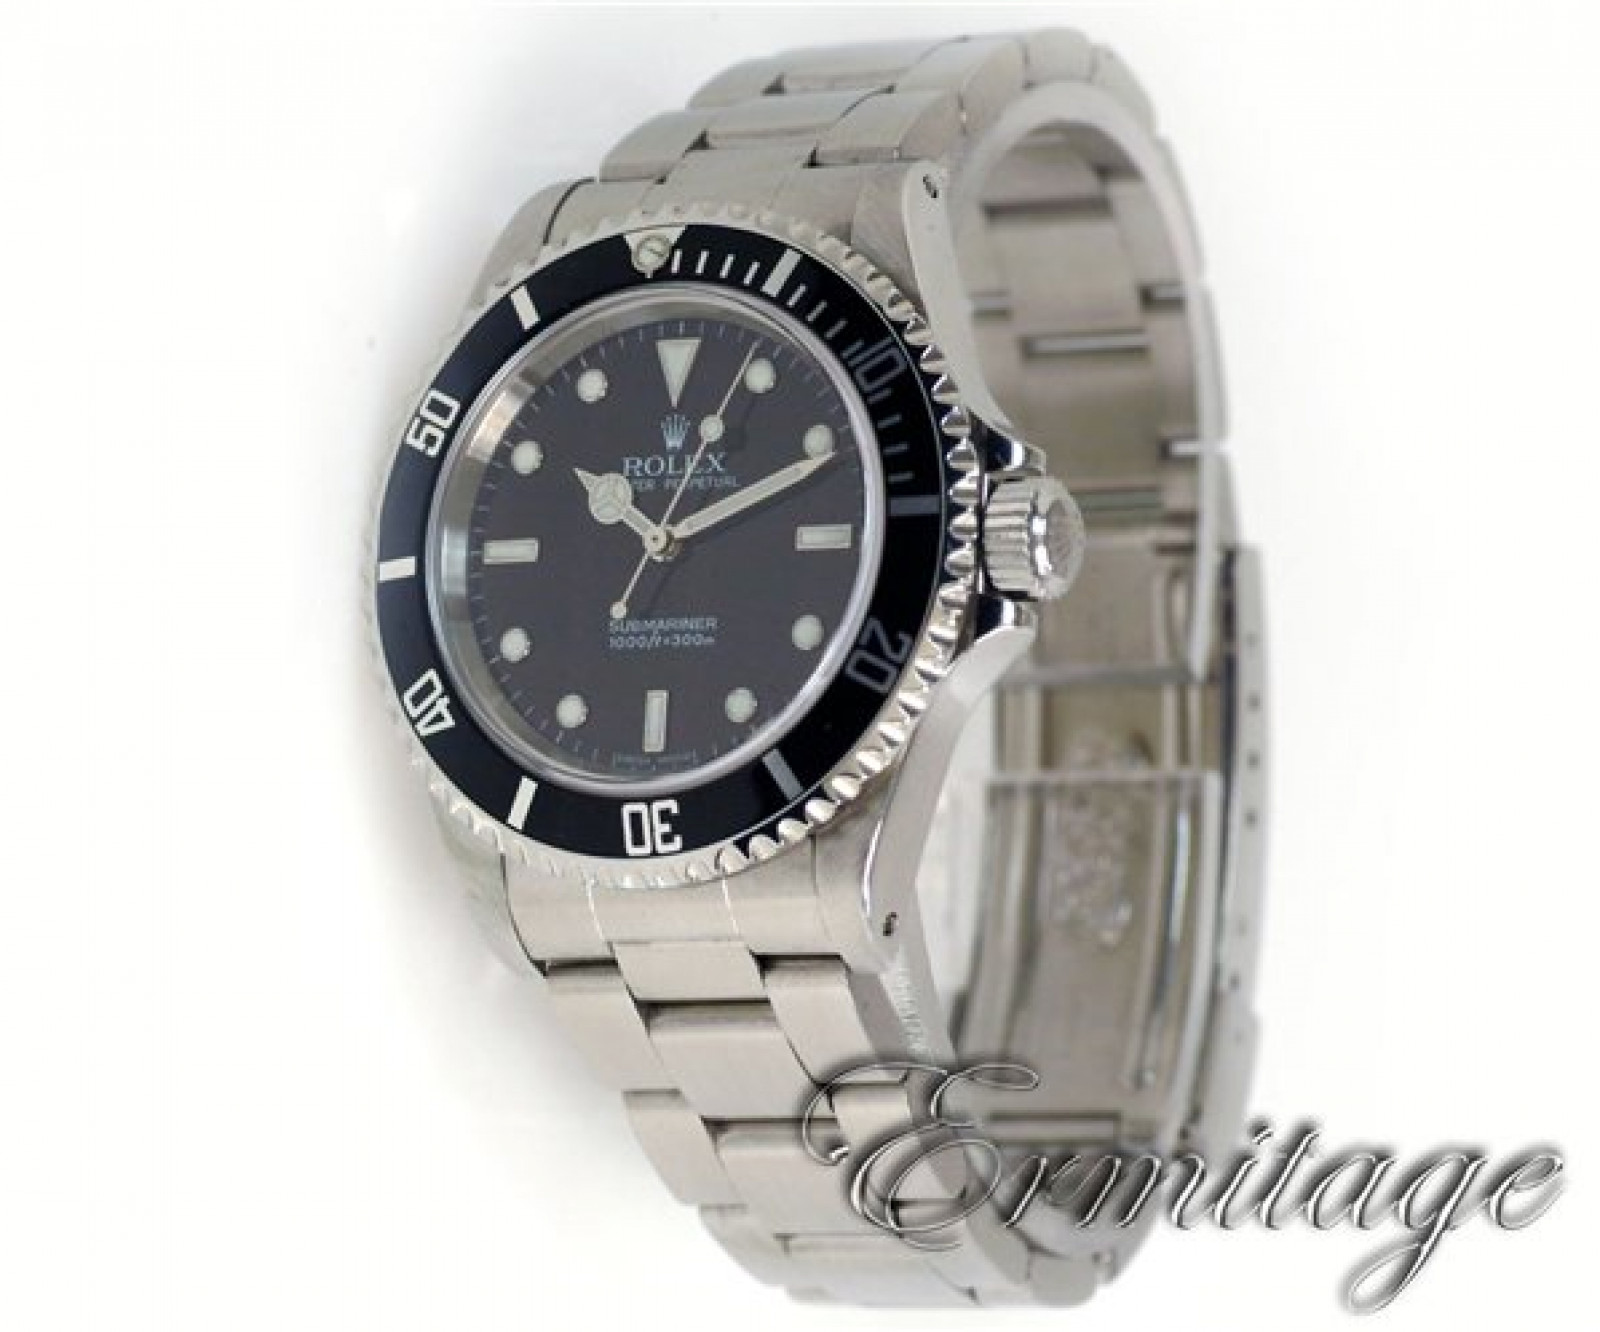 Pre-Owned Rolex Submariner 14060M Steel Year 2004